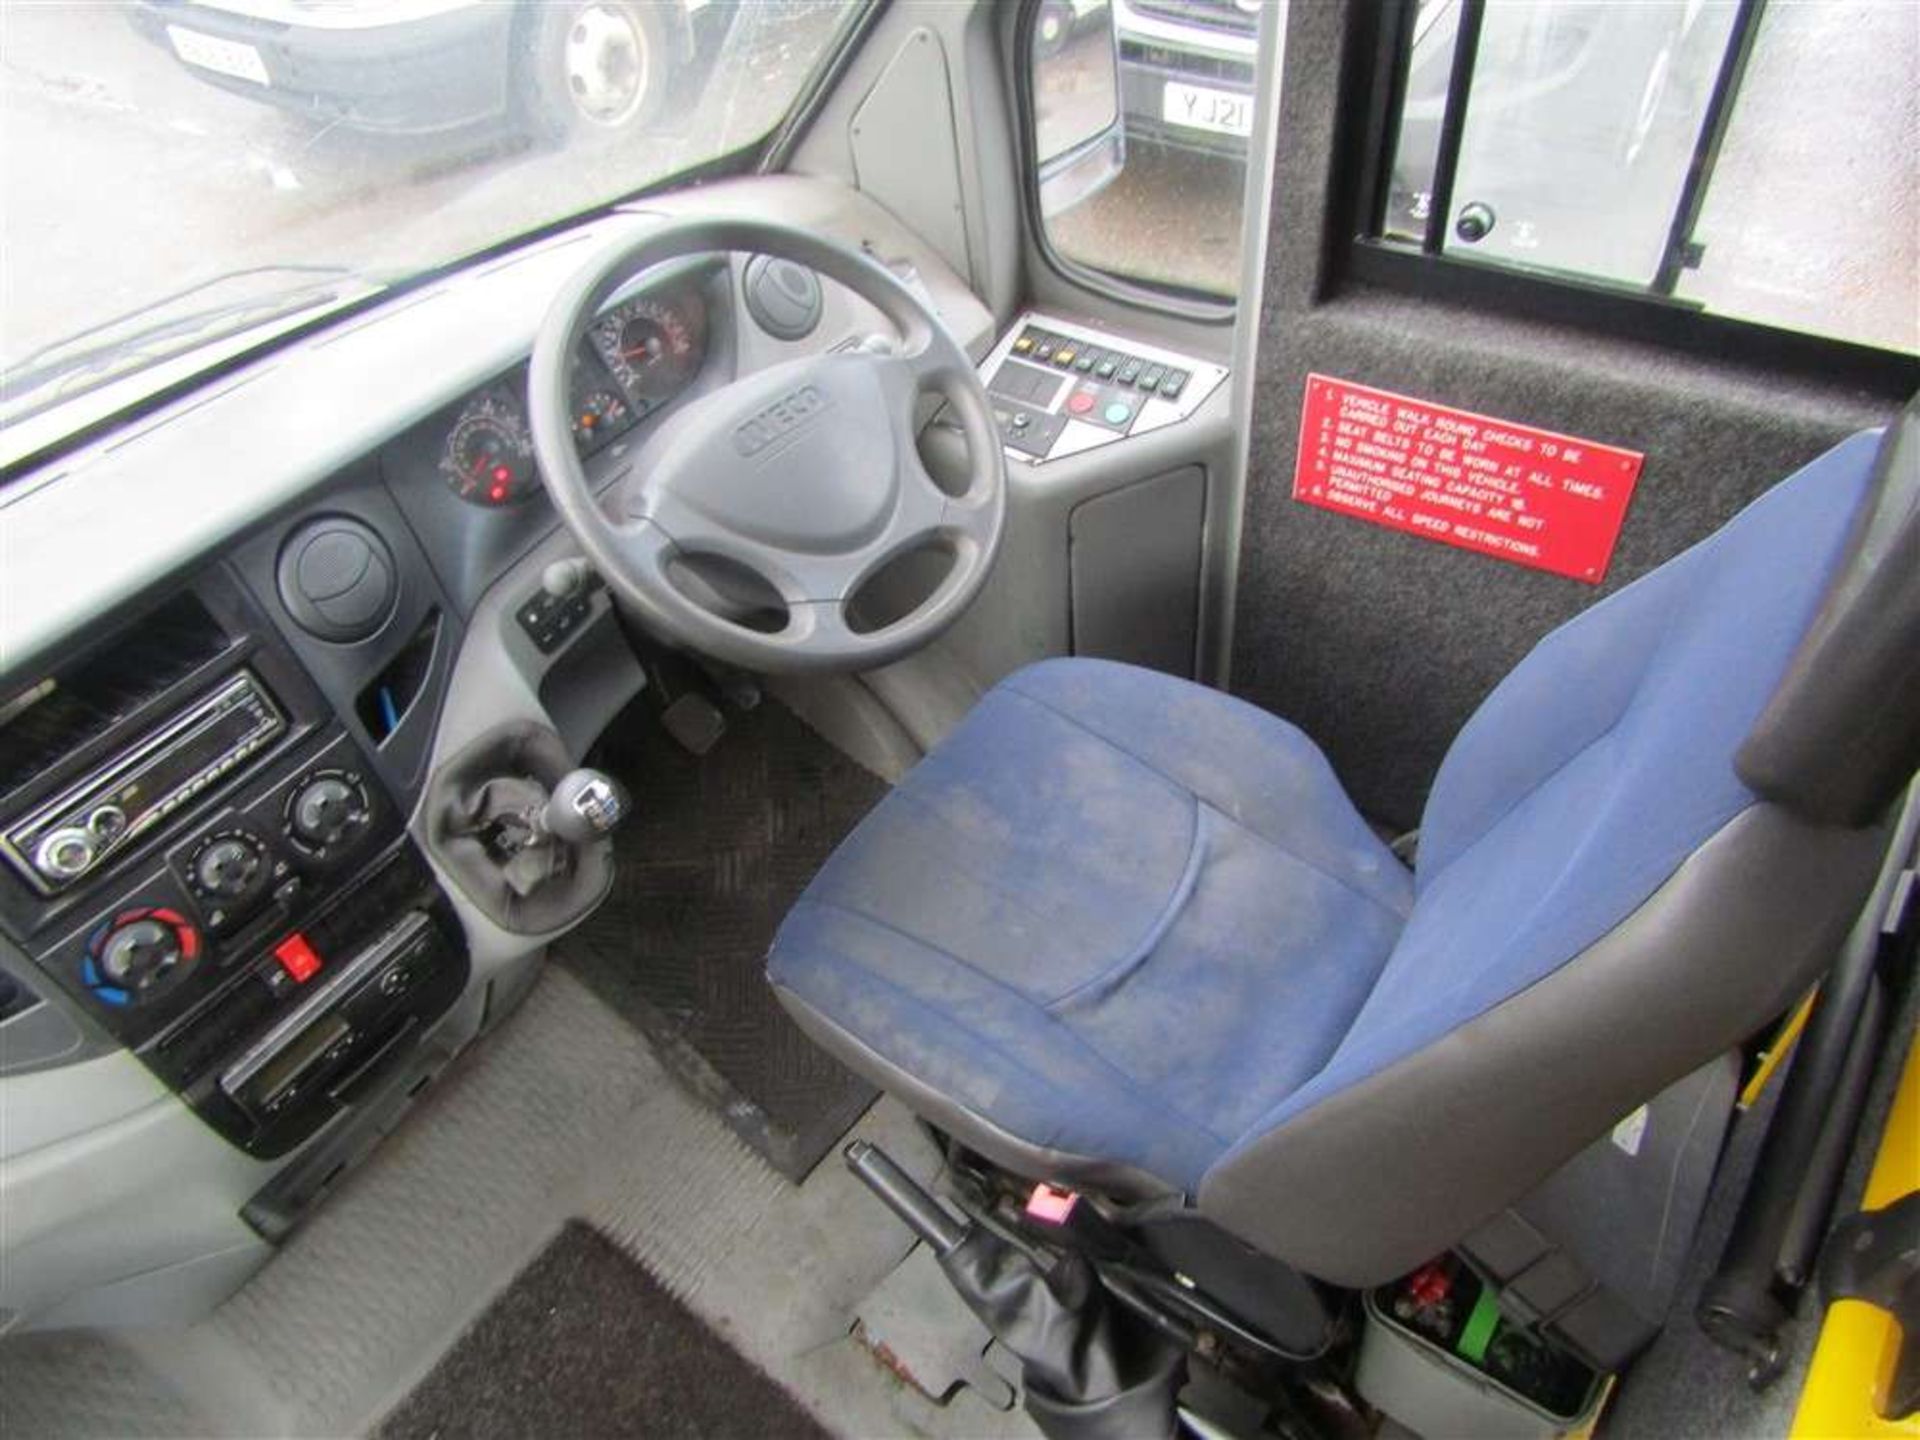 2008 57 reg Iveco Daily 50C15 Welfare Bus - Image 6 of 7